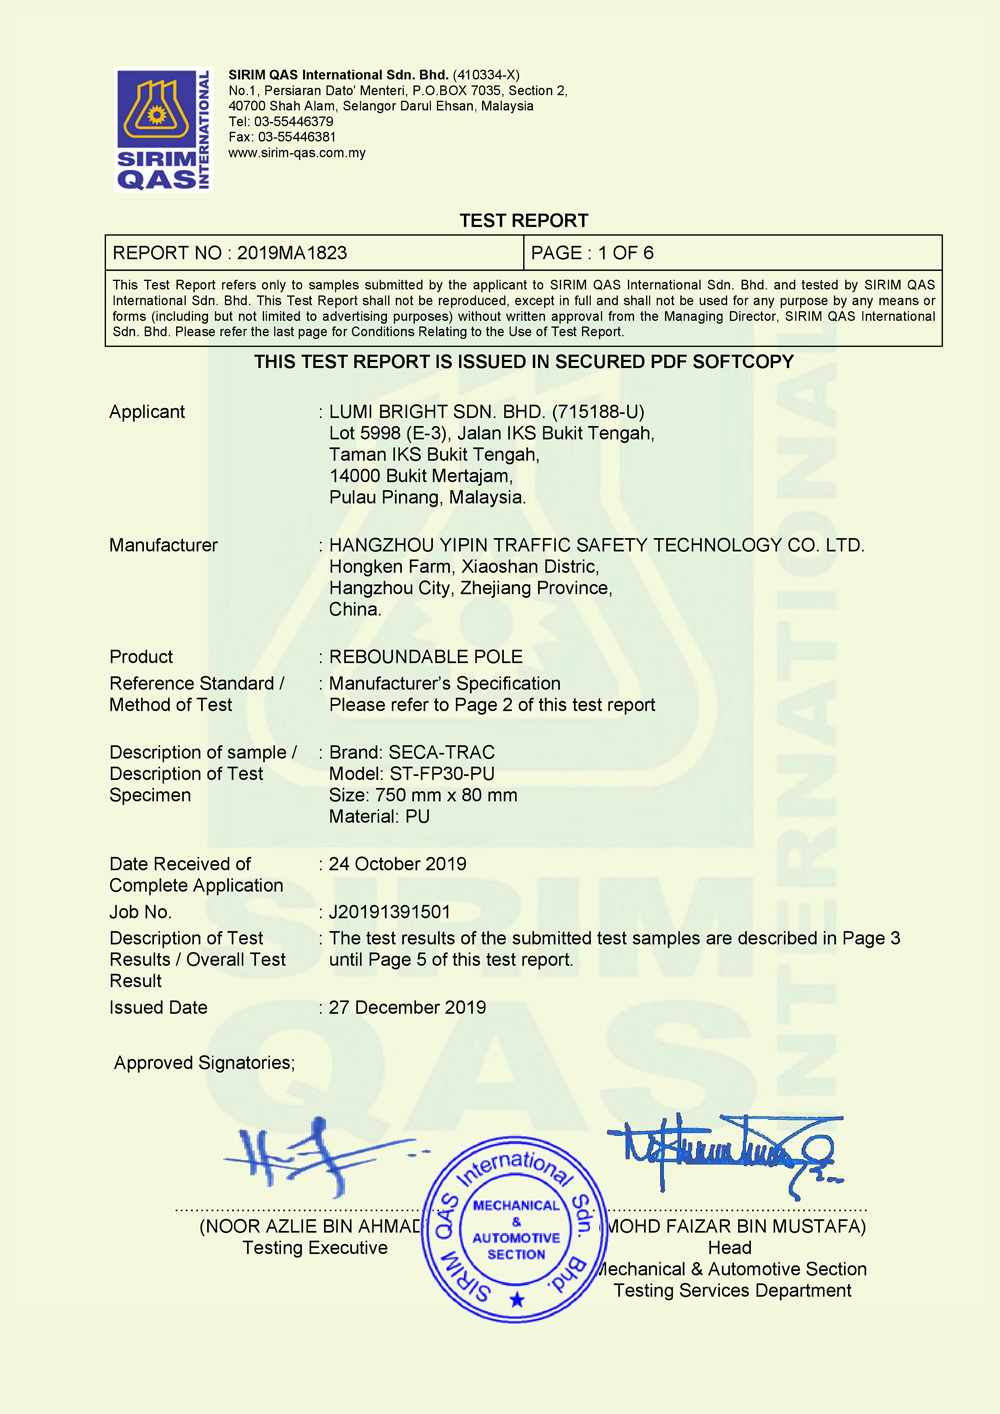 SIRIM Certification of passed the test on Reboundable Pole_Flexible Pole